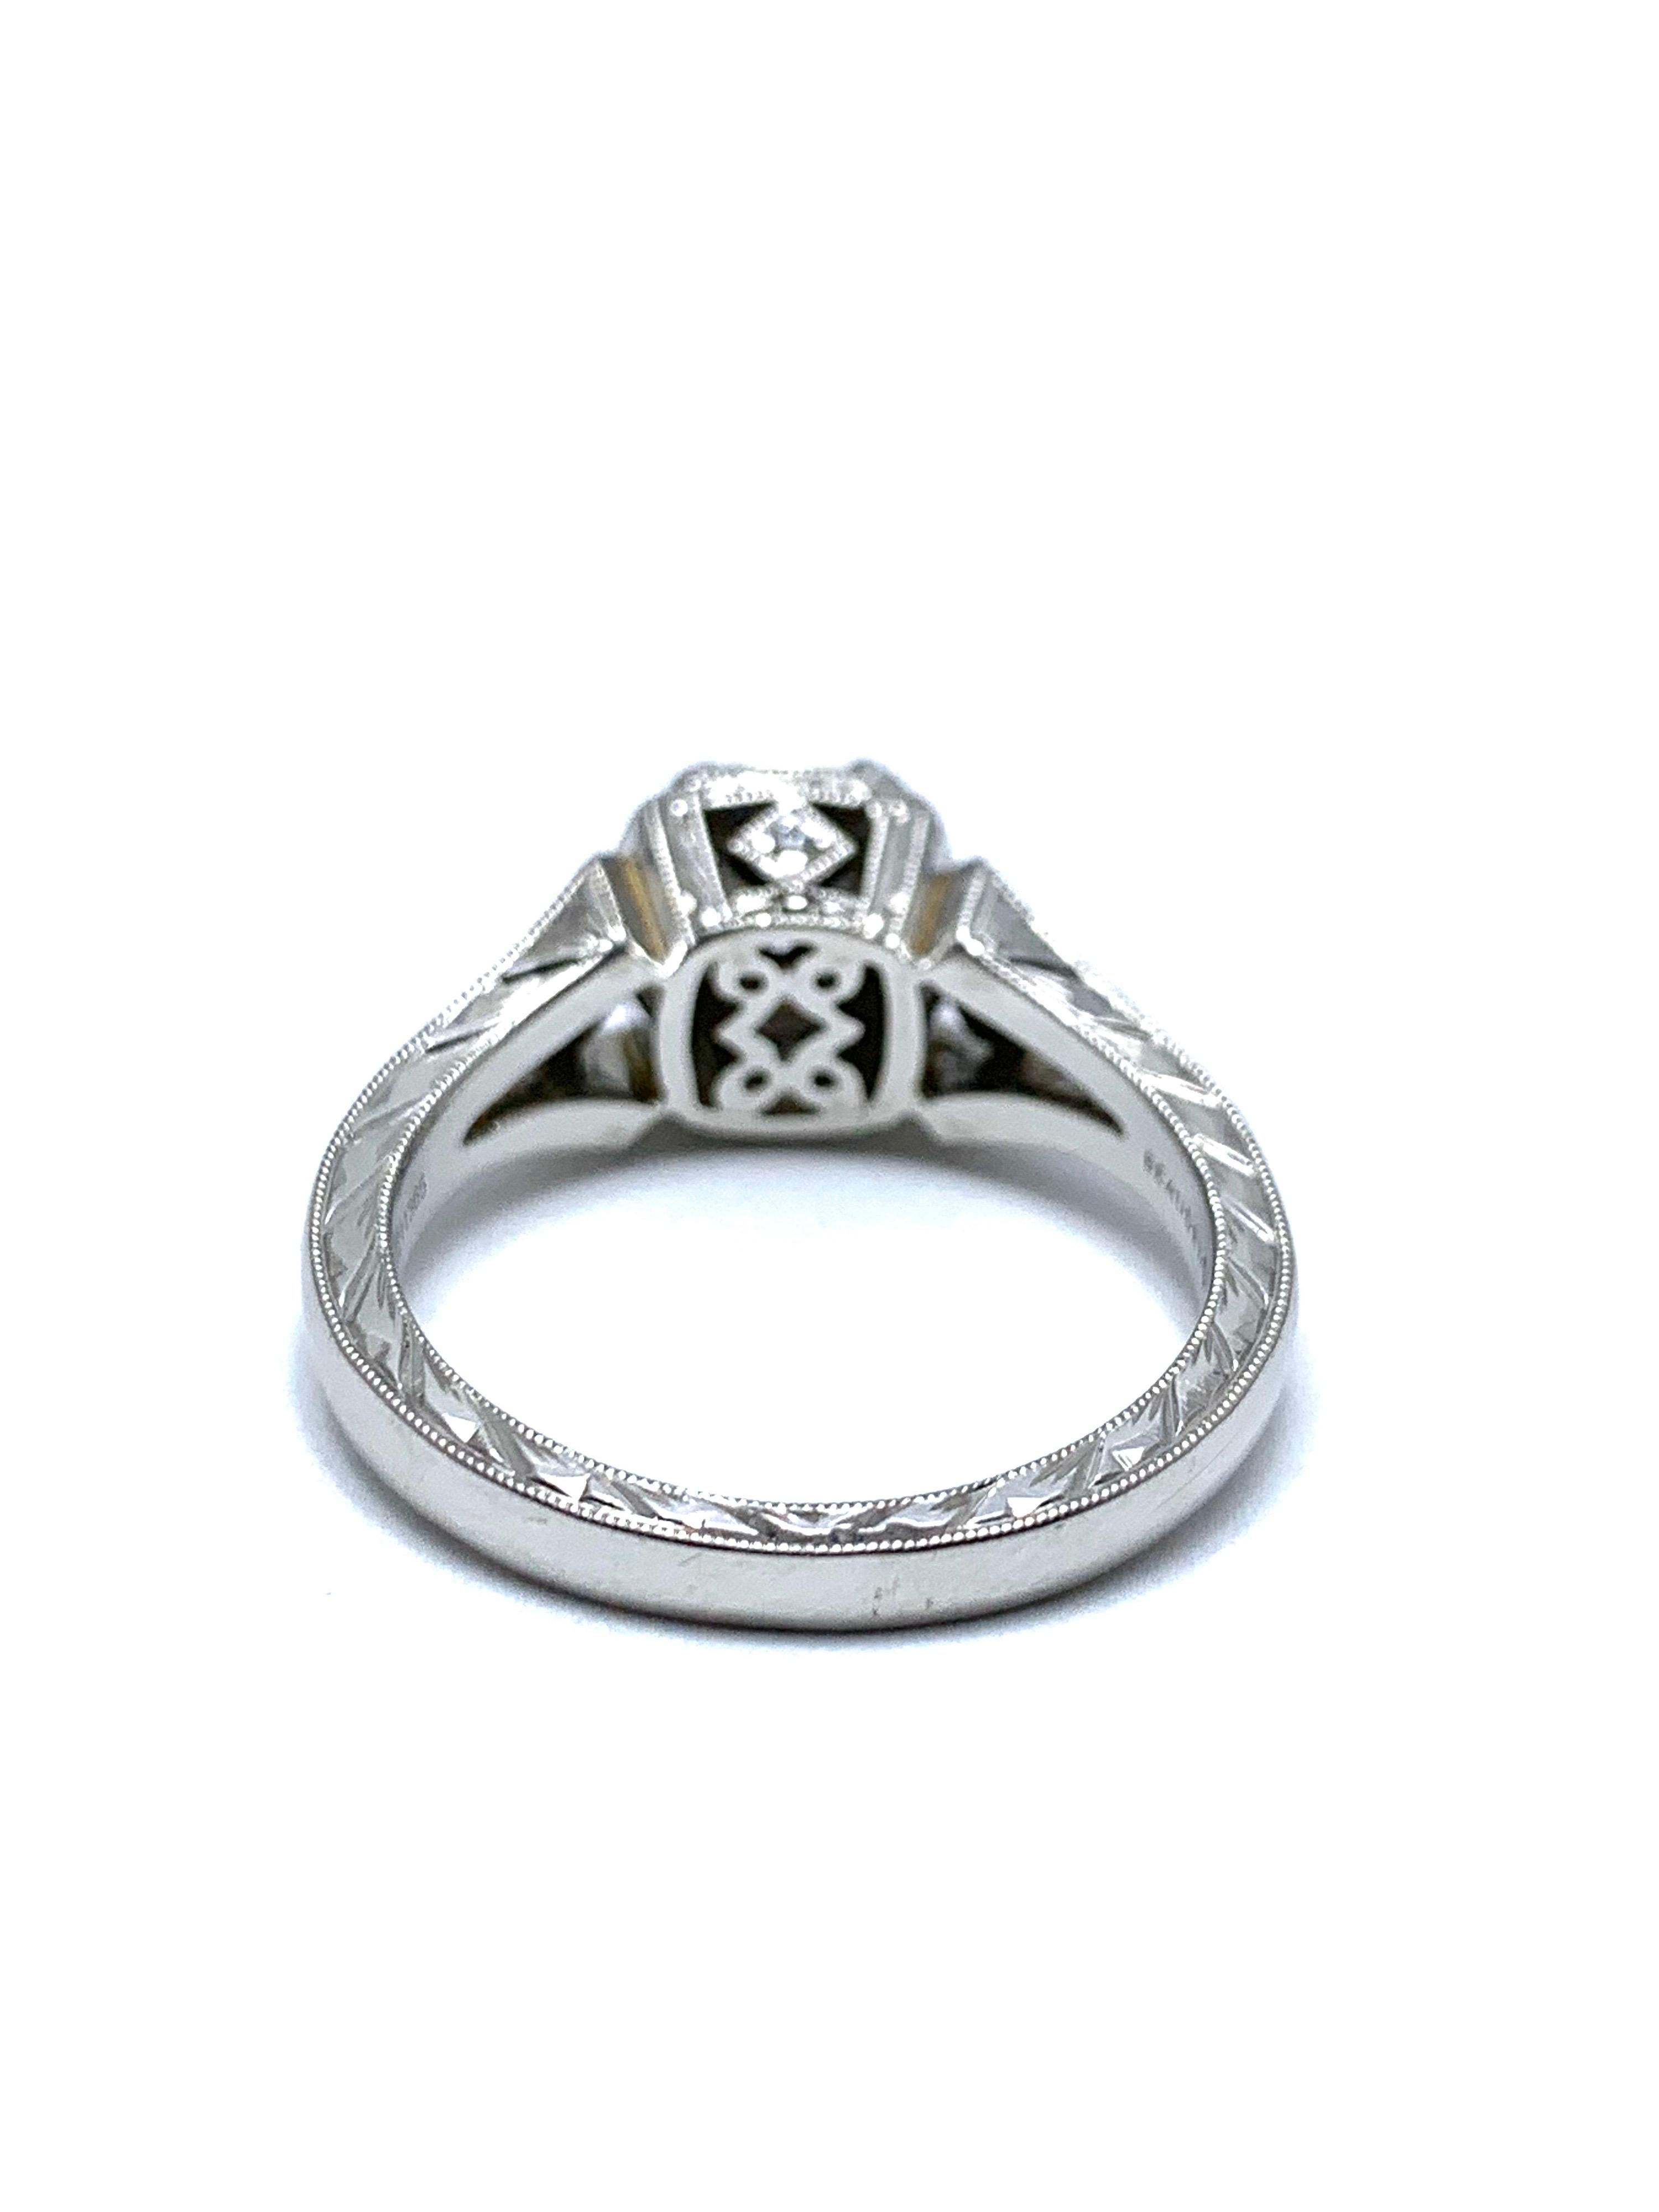 1.03 Carat D/SI1 Diamond with Diamond Halo and Hand Engraved Platinum Ring For Sale 2